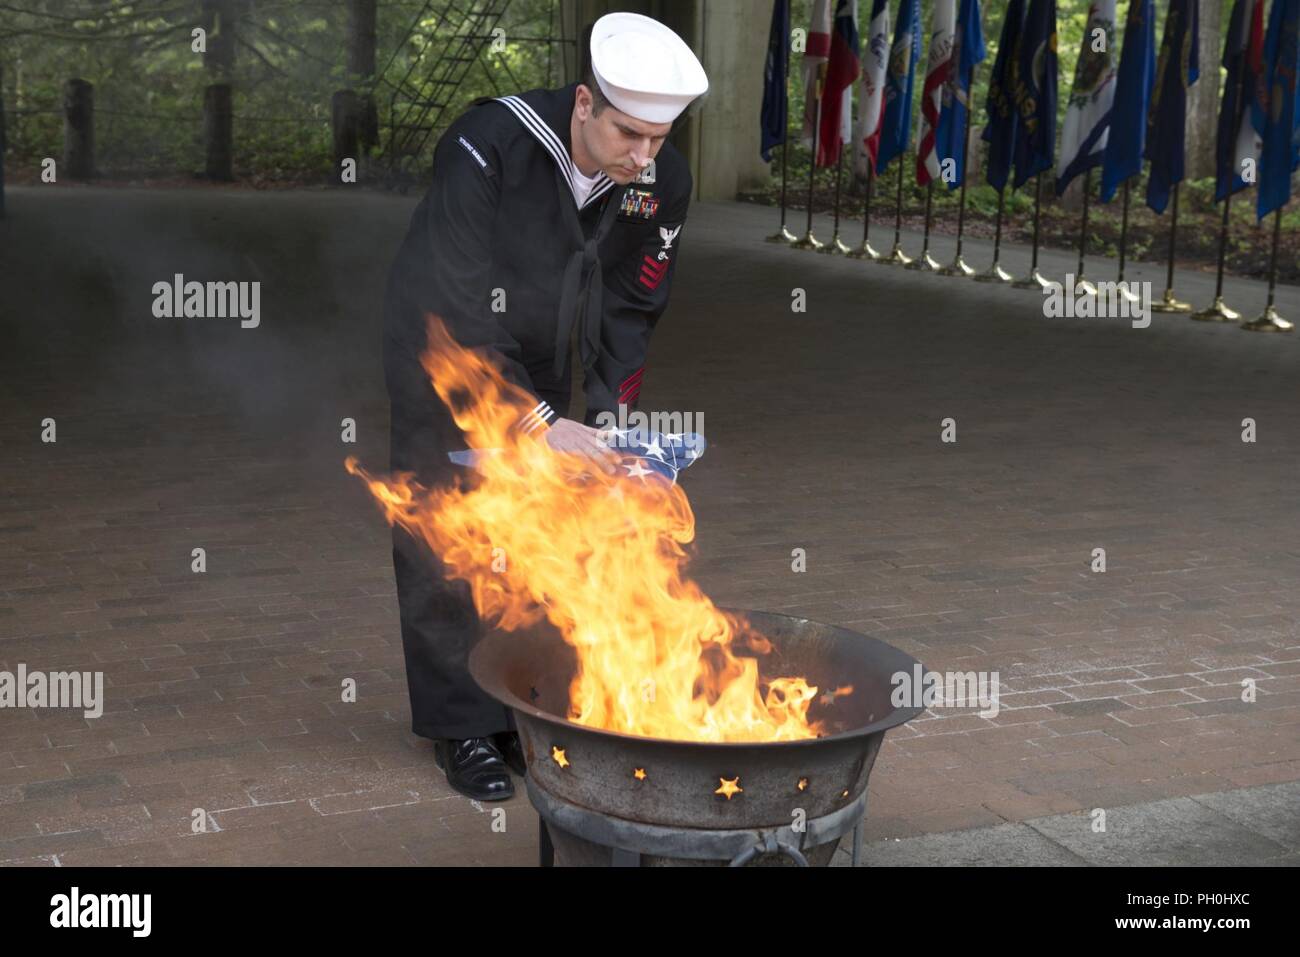 BANGOR, Wash. (June 14, 2018) Machinery Repairman 1st Class David Sams, from East Haddam, Connecticut, assigned to Trident Training Facility in Bangor, Wash., places the remains of a U.S. flag to a fire during a flag retirement ceremony at Naval Base Kitsap-Bangor. When a U.S. flag becomes worn, torn, faded, or badly soiled, it should be retired with the dignity and respect befitting it. BANGOR, Wash. (June 14, 2018) Musician 1st Class Chris Hodges, from Tuscaloosa, Alabama, assigned to Navy Band Northwest, plays the trumpet during a flag retirement ceremony at Naval Base Kitsap - Bangor. When Stock Photo